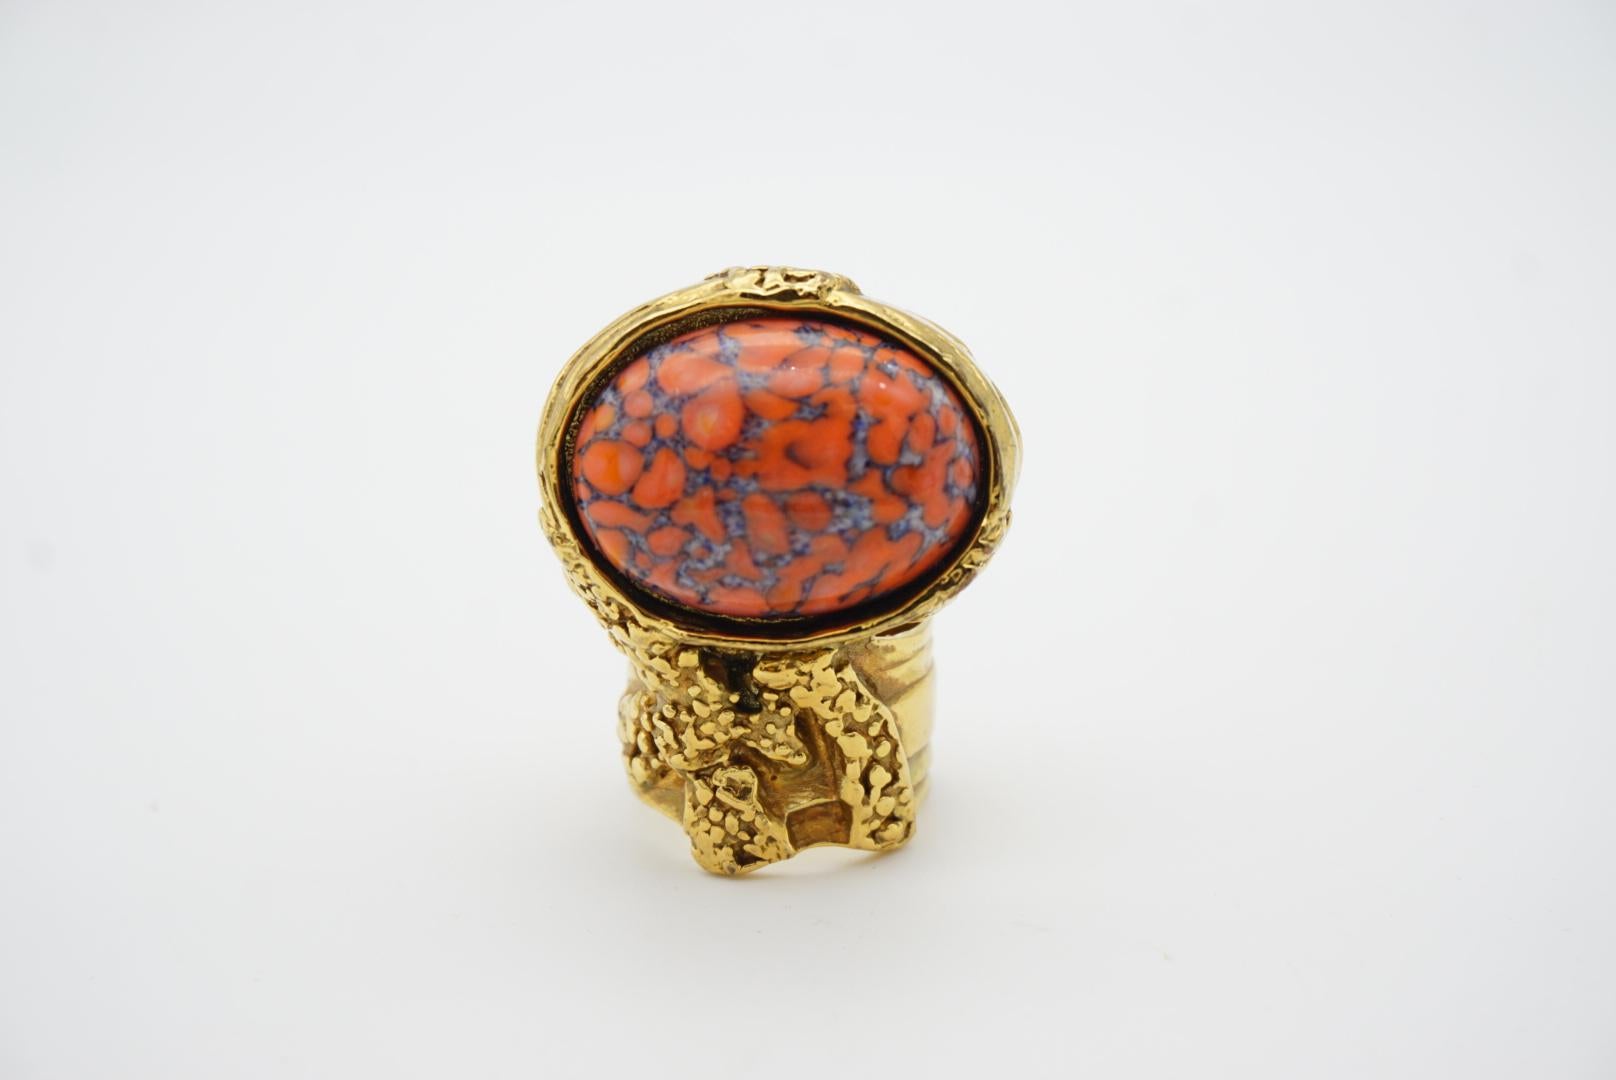 Yves Saint Laurent YSL Arty Orange Coral Cabochon Statement Gold Ring, Size 7 For Sale 1